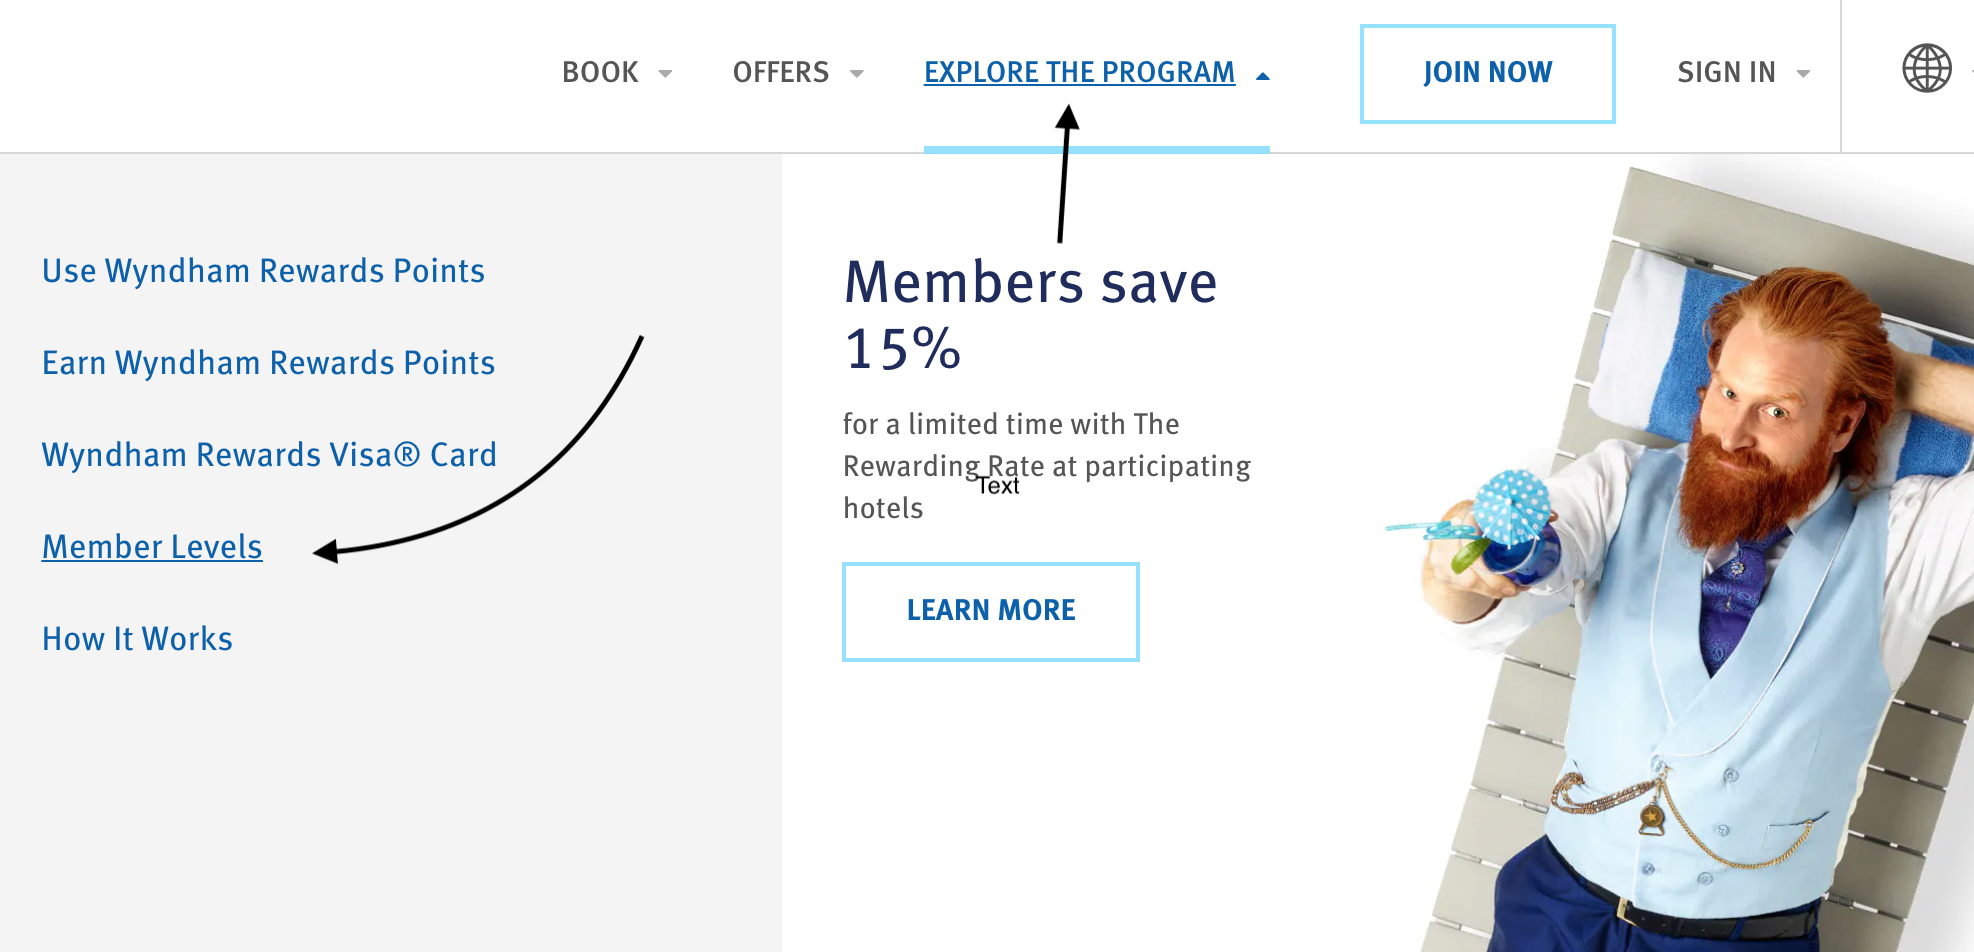 Screenshot of Wyndham Home page to "Explore the Program" and click Member levels